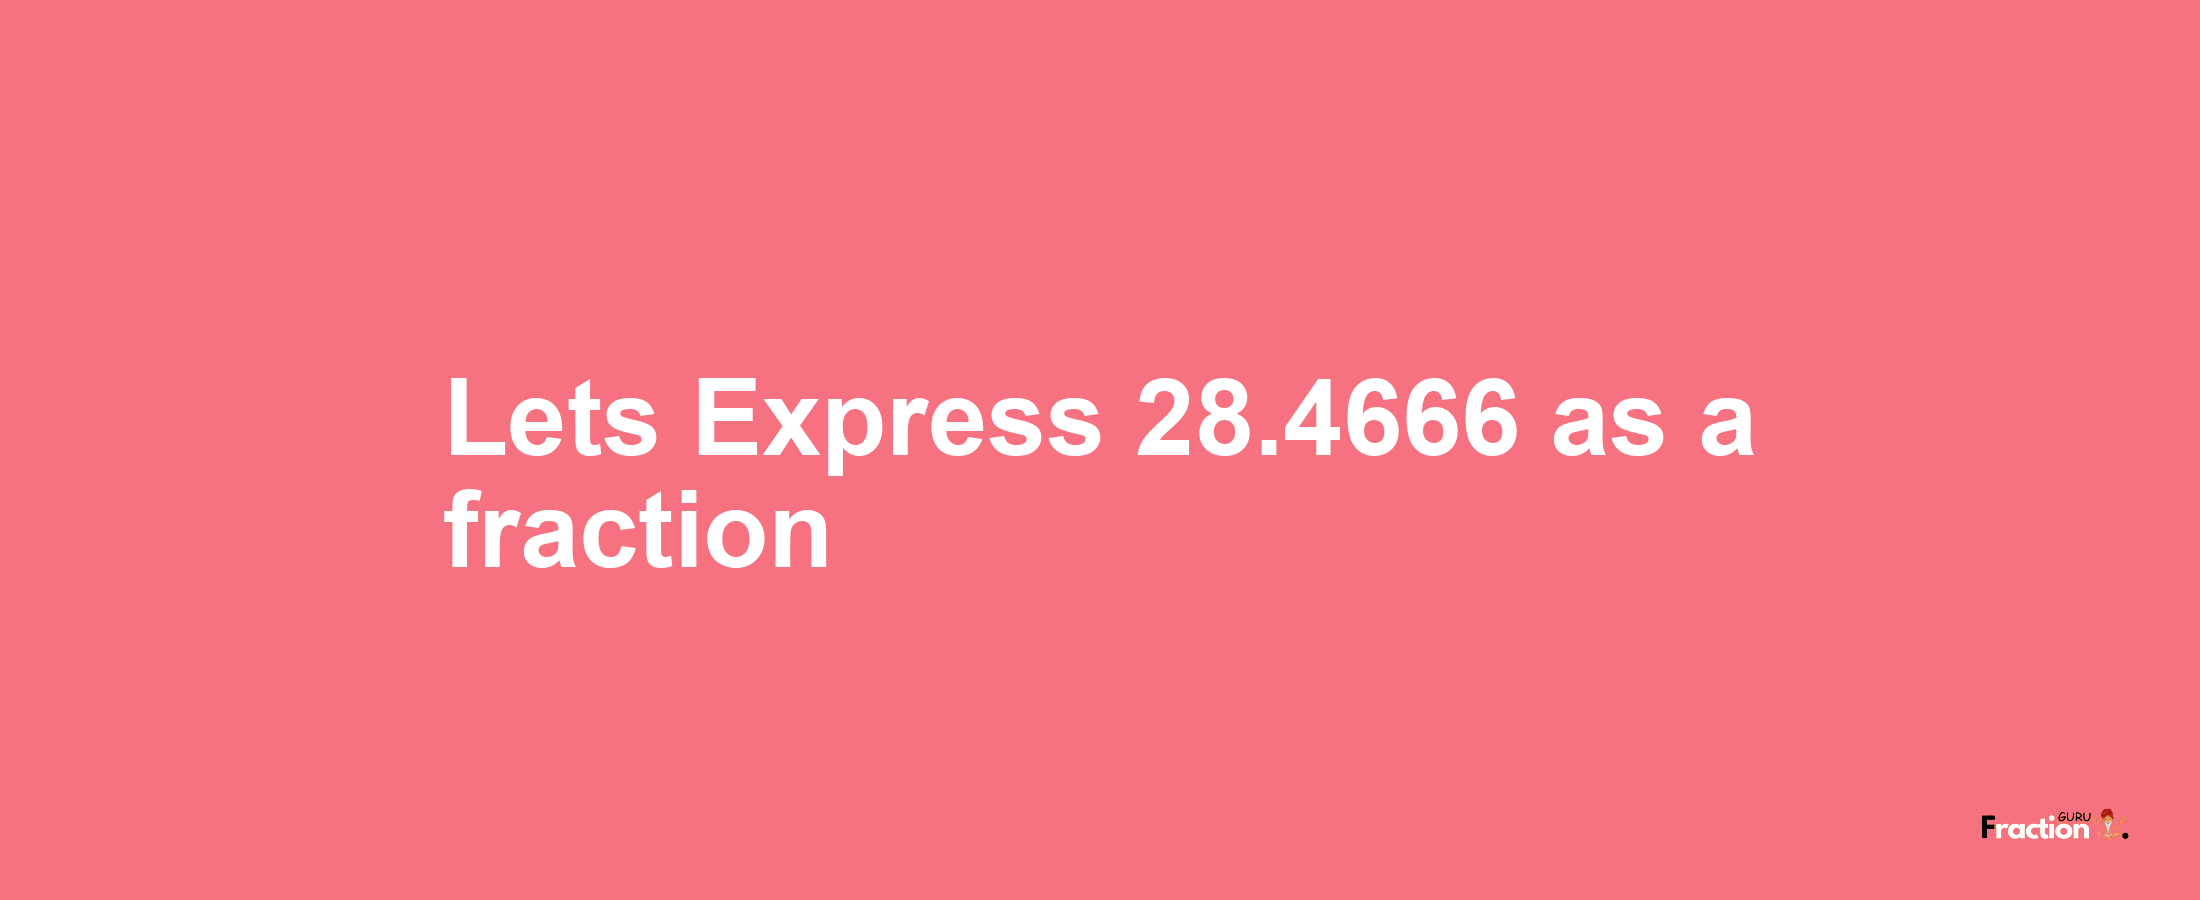 Lets Express 28.4666 as afraction